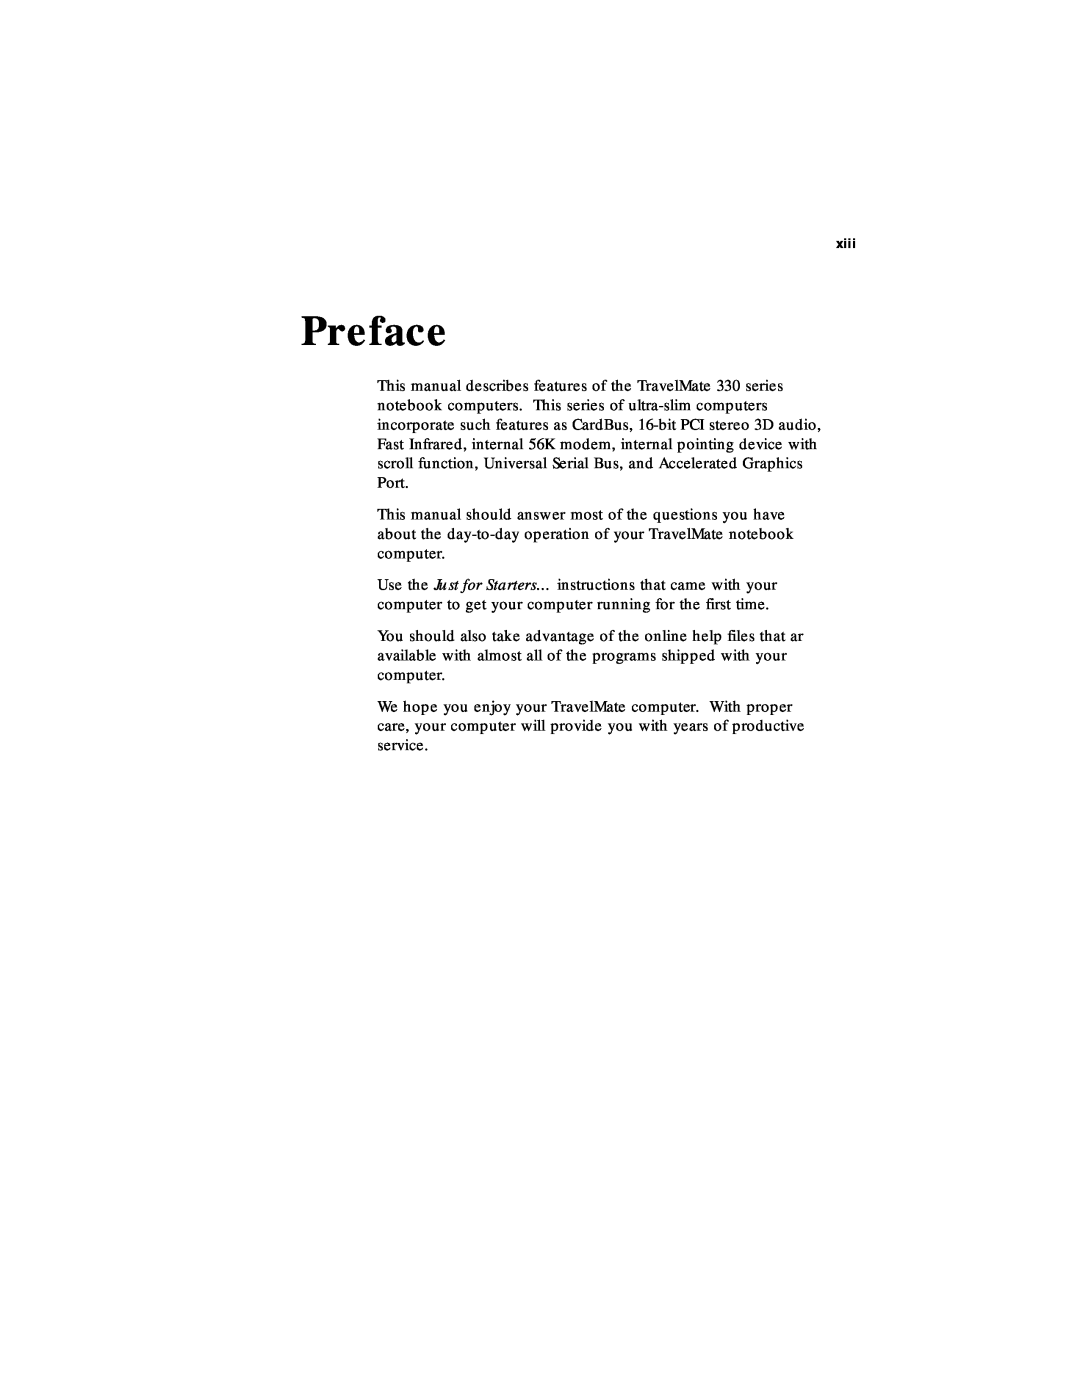 Acer 330 Series manual Preface, xiii 